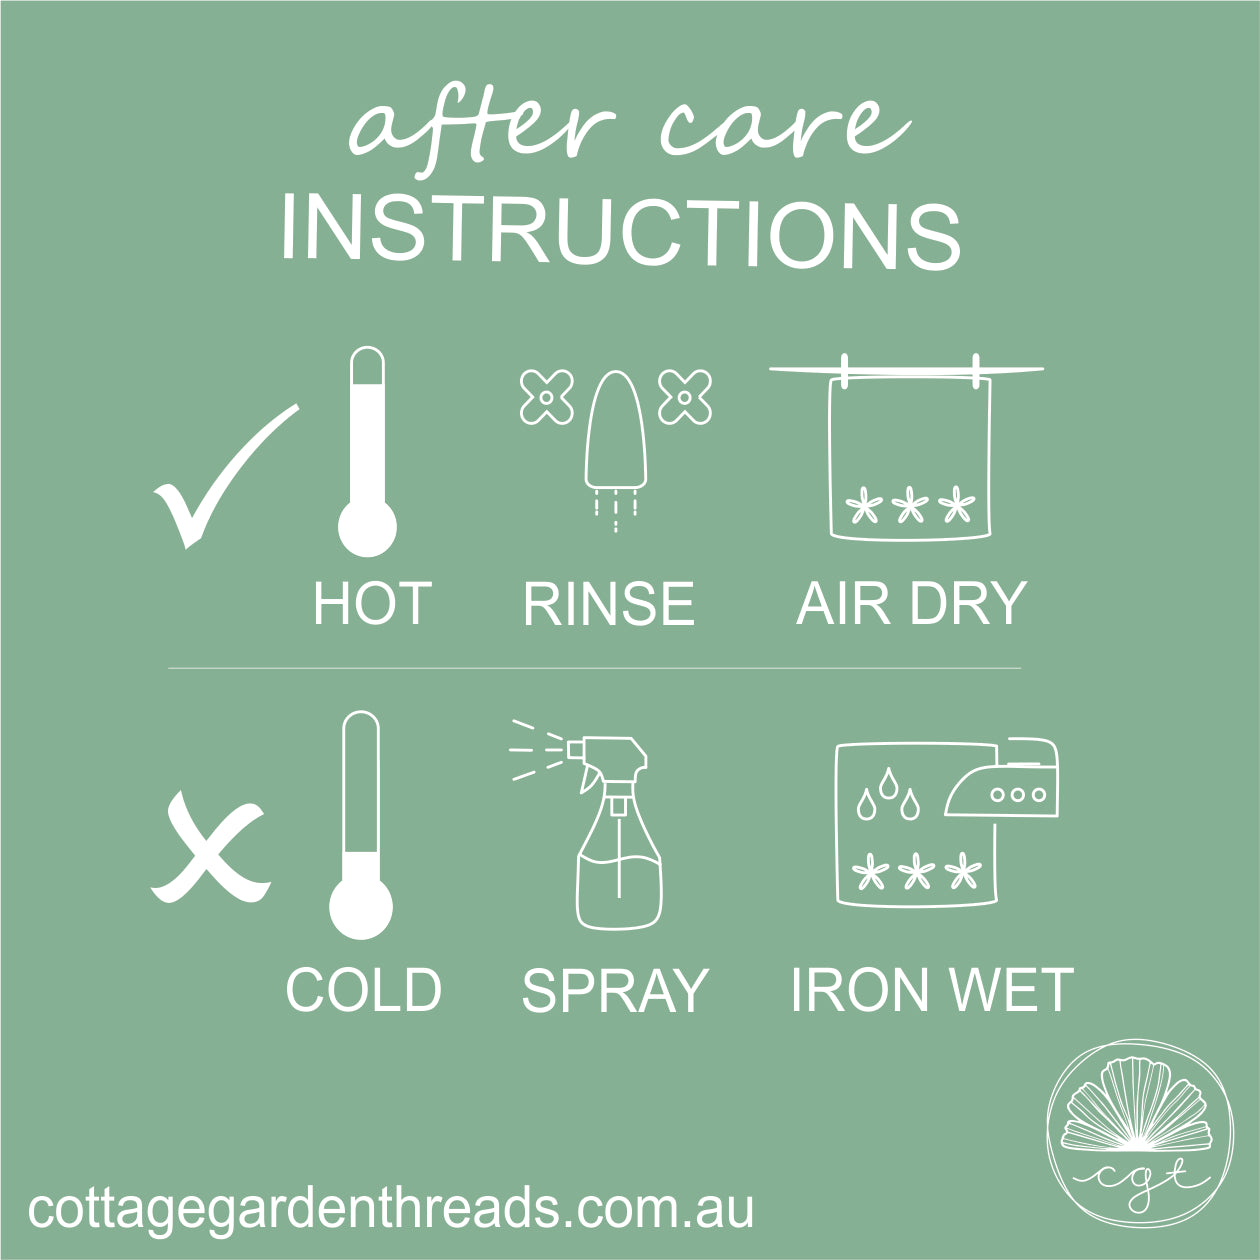 After Care Instructions for Cottage Garden Threads